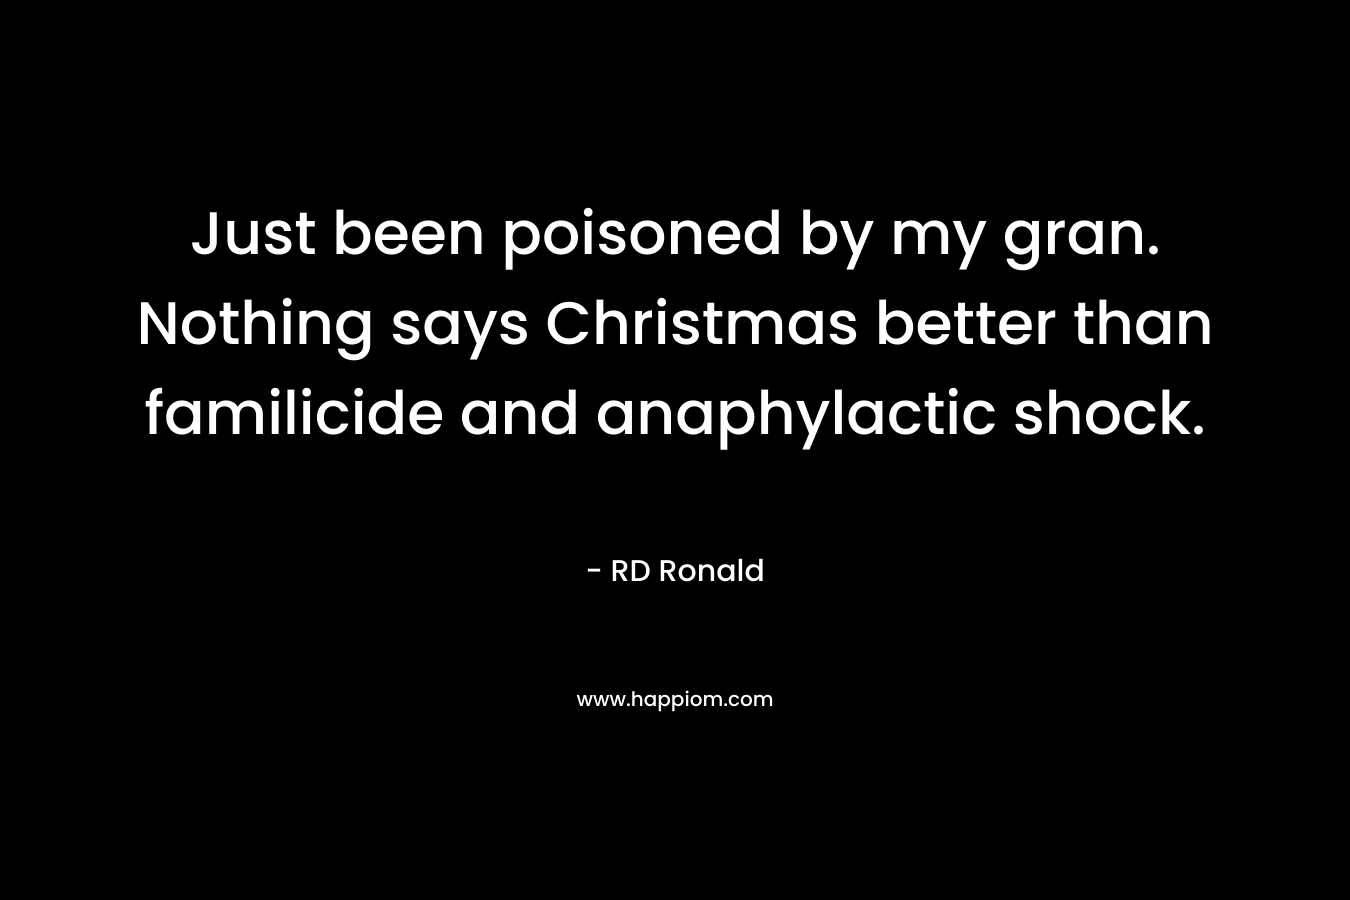 Just been poisoned by my gran. Nothing says Christmas better than familicide and anaphylactic shock. – RD Ronald